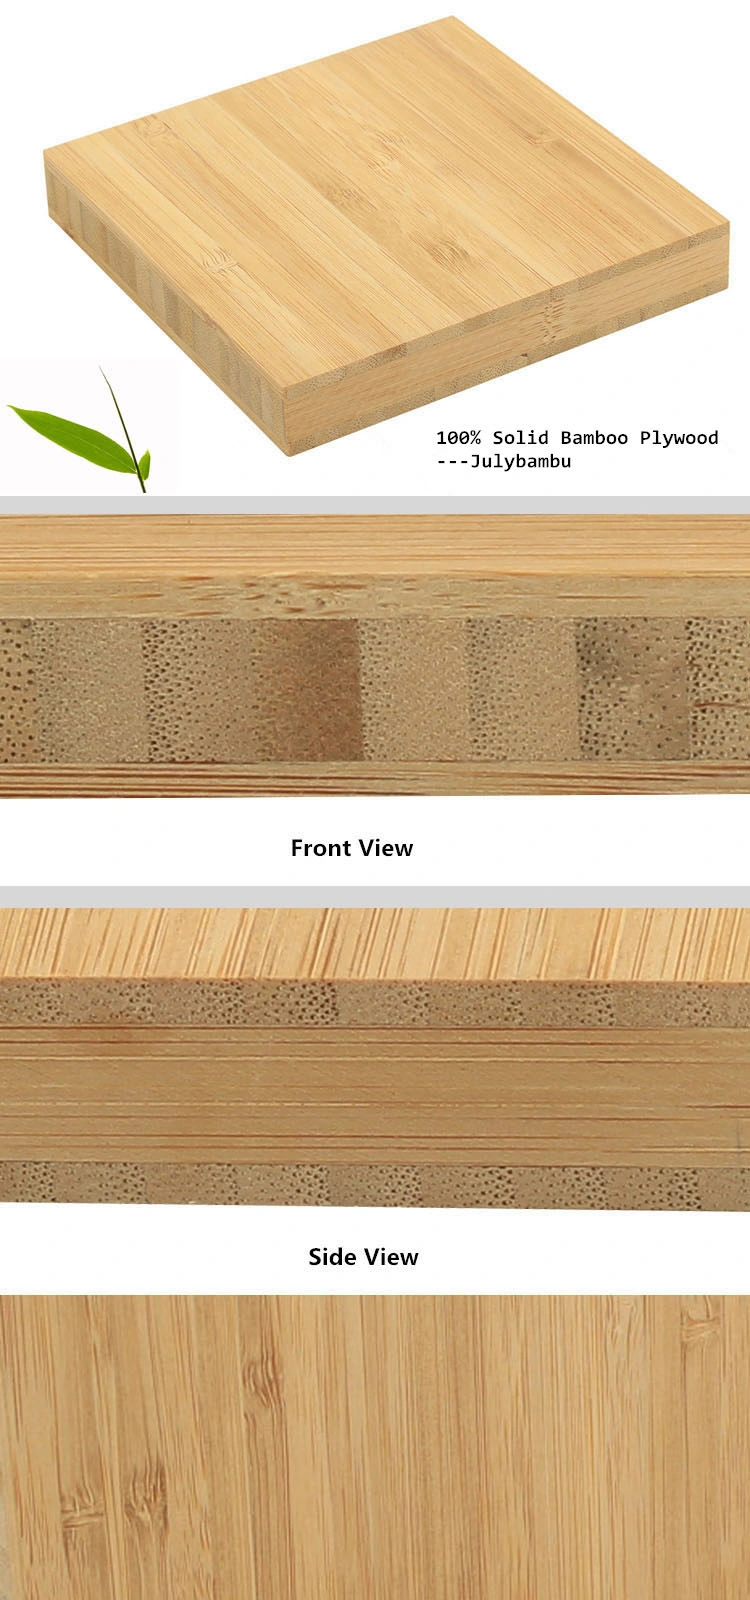 Eco-Friendlier Multilayer Carbonized Bamboo Plywood Panel for Table Top